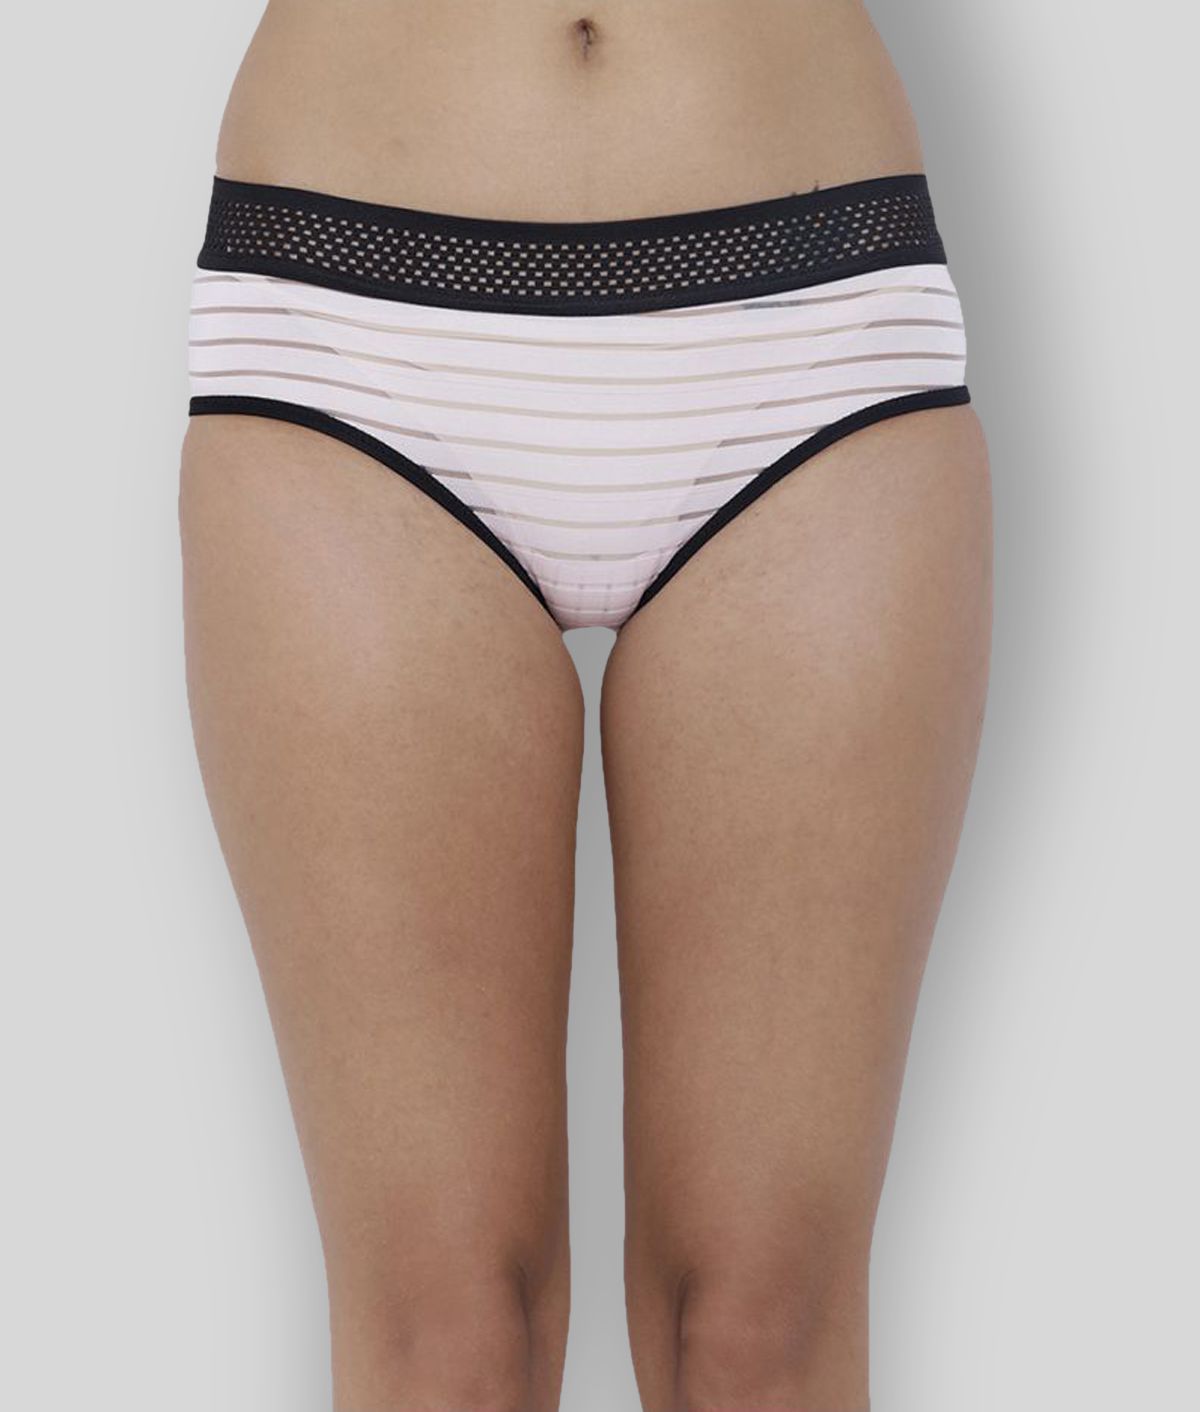 BASIICS By La Intimo - Pink Polyester Striped Women's Briefs ( Pack of 1 )